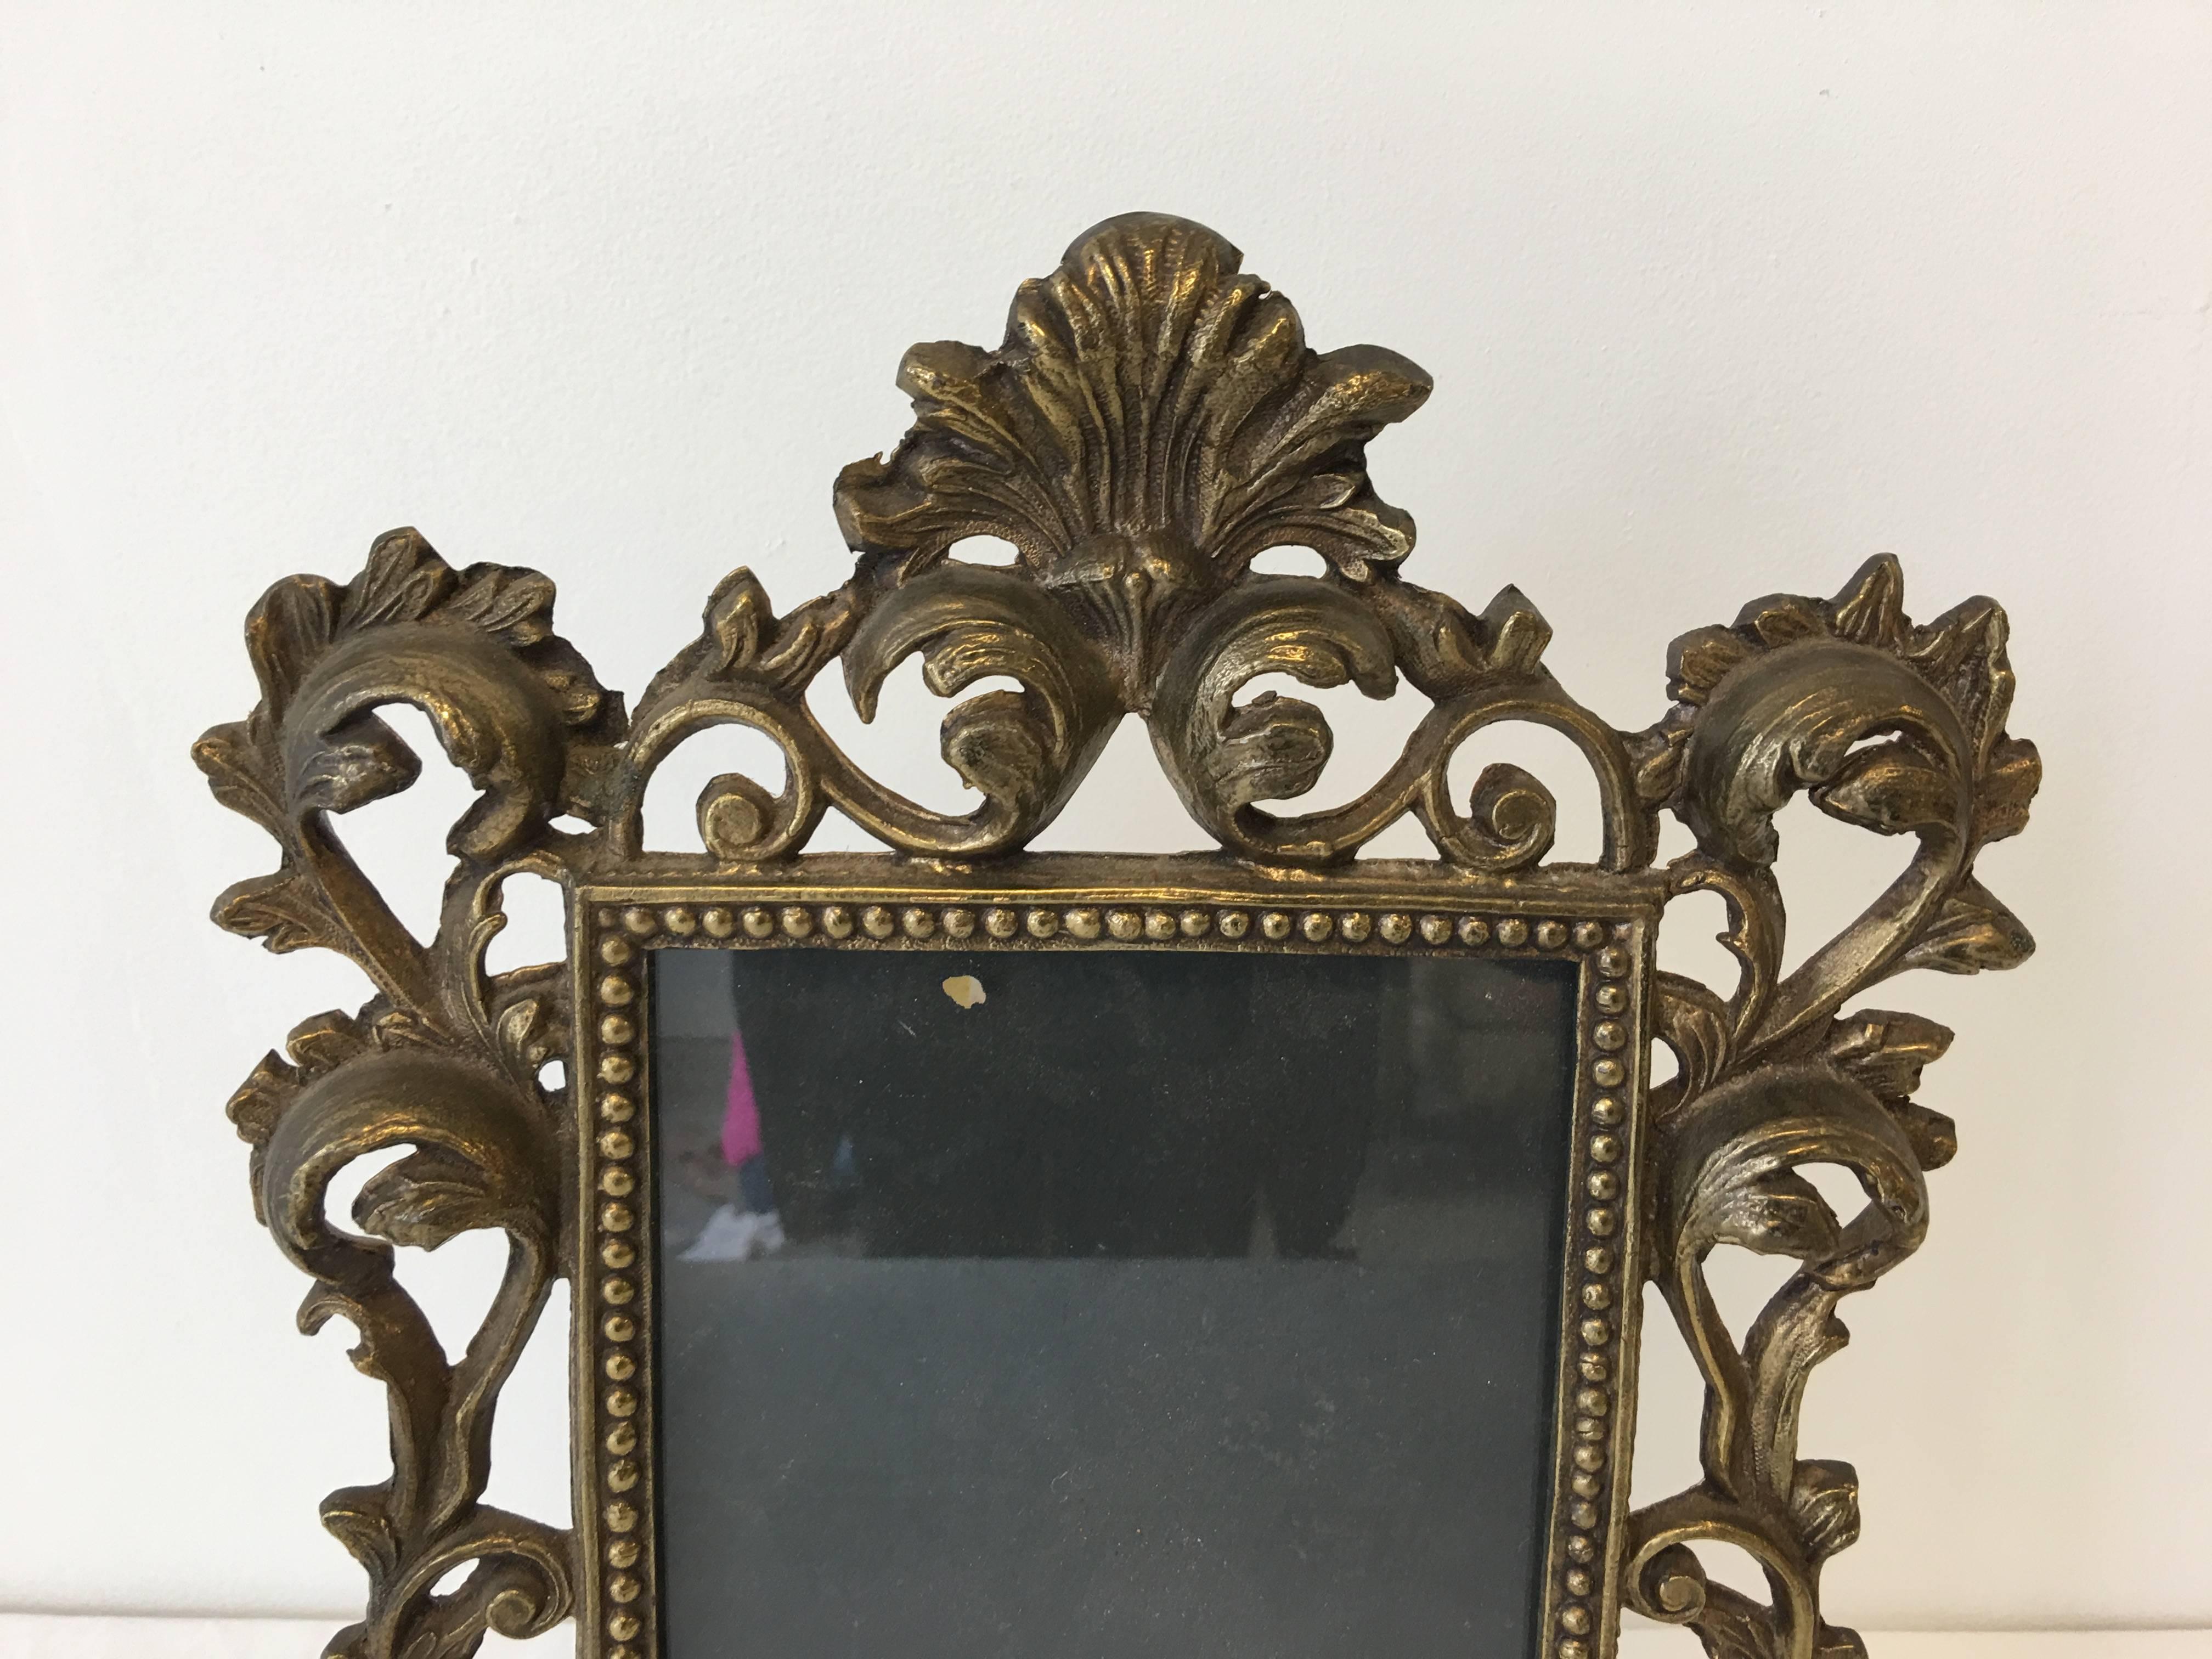 Offered is a fabulous, 19th century Art Nouveau, Louis XV style bronze standing picture frame with heavy detailing. Fits a 5" x 7" picture.